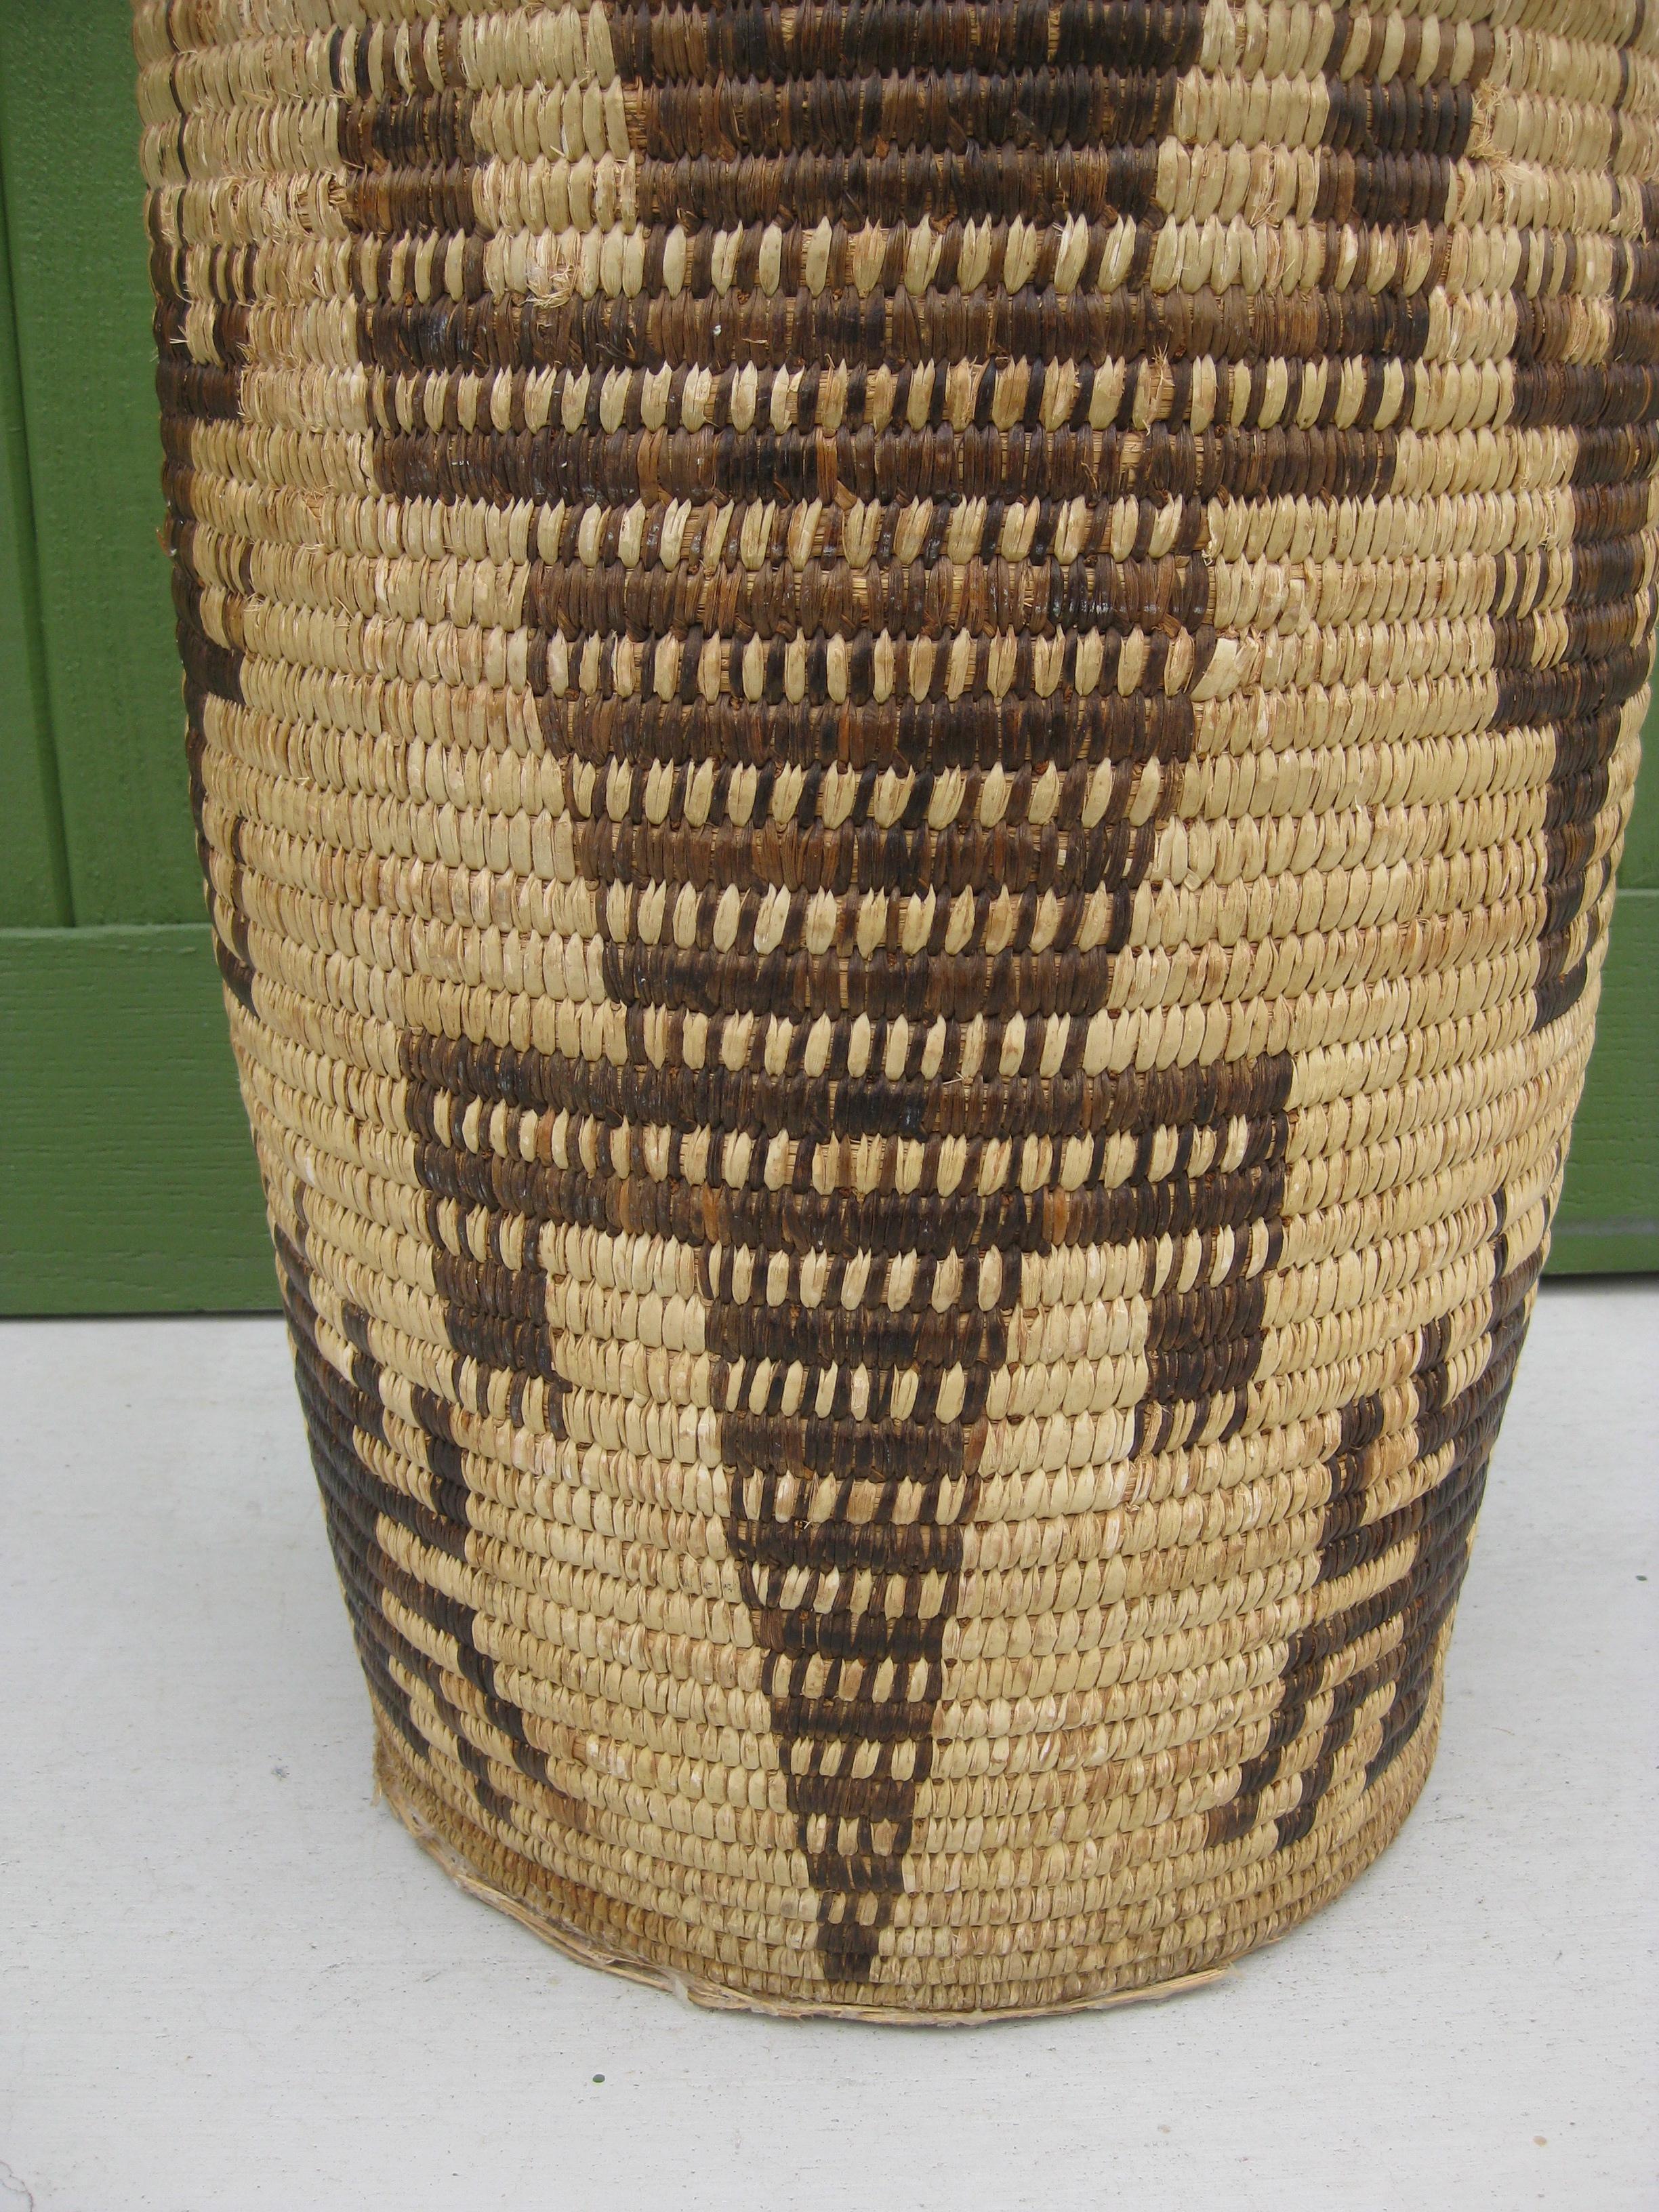 Hand-Crafted Papago Native American Indian Pictorial Coiled Lidded Olla Basket HUGE! For Sale